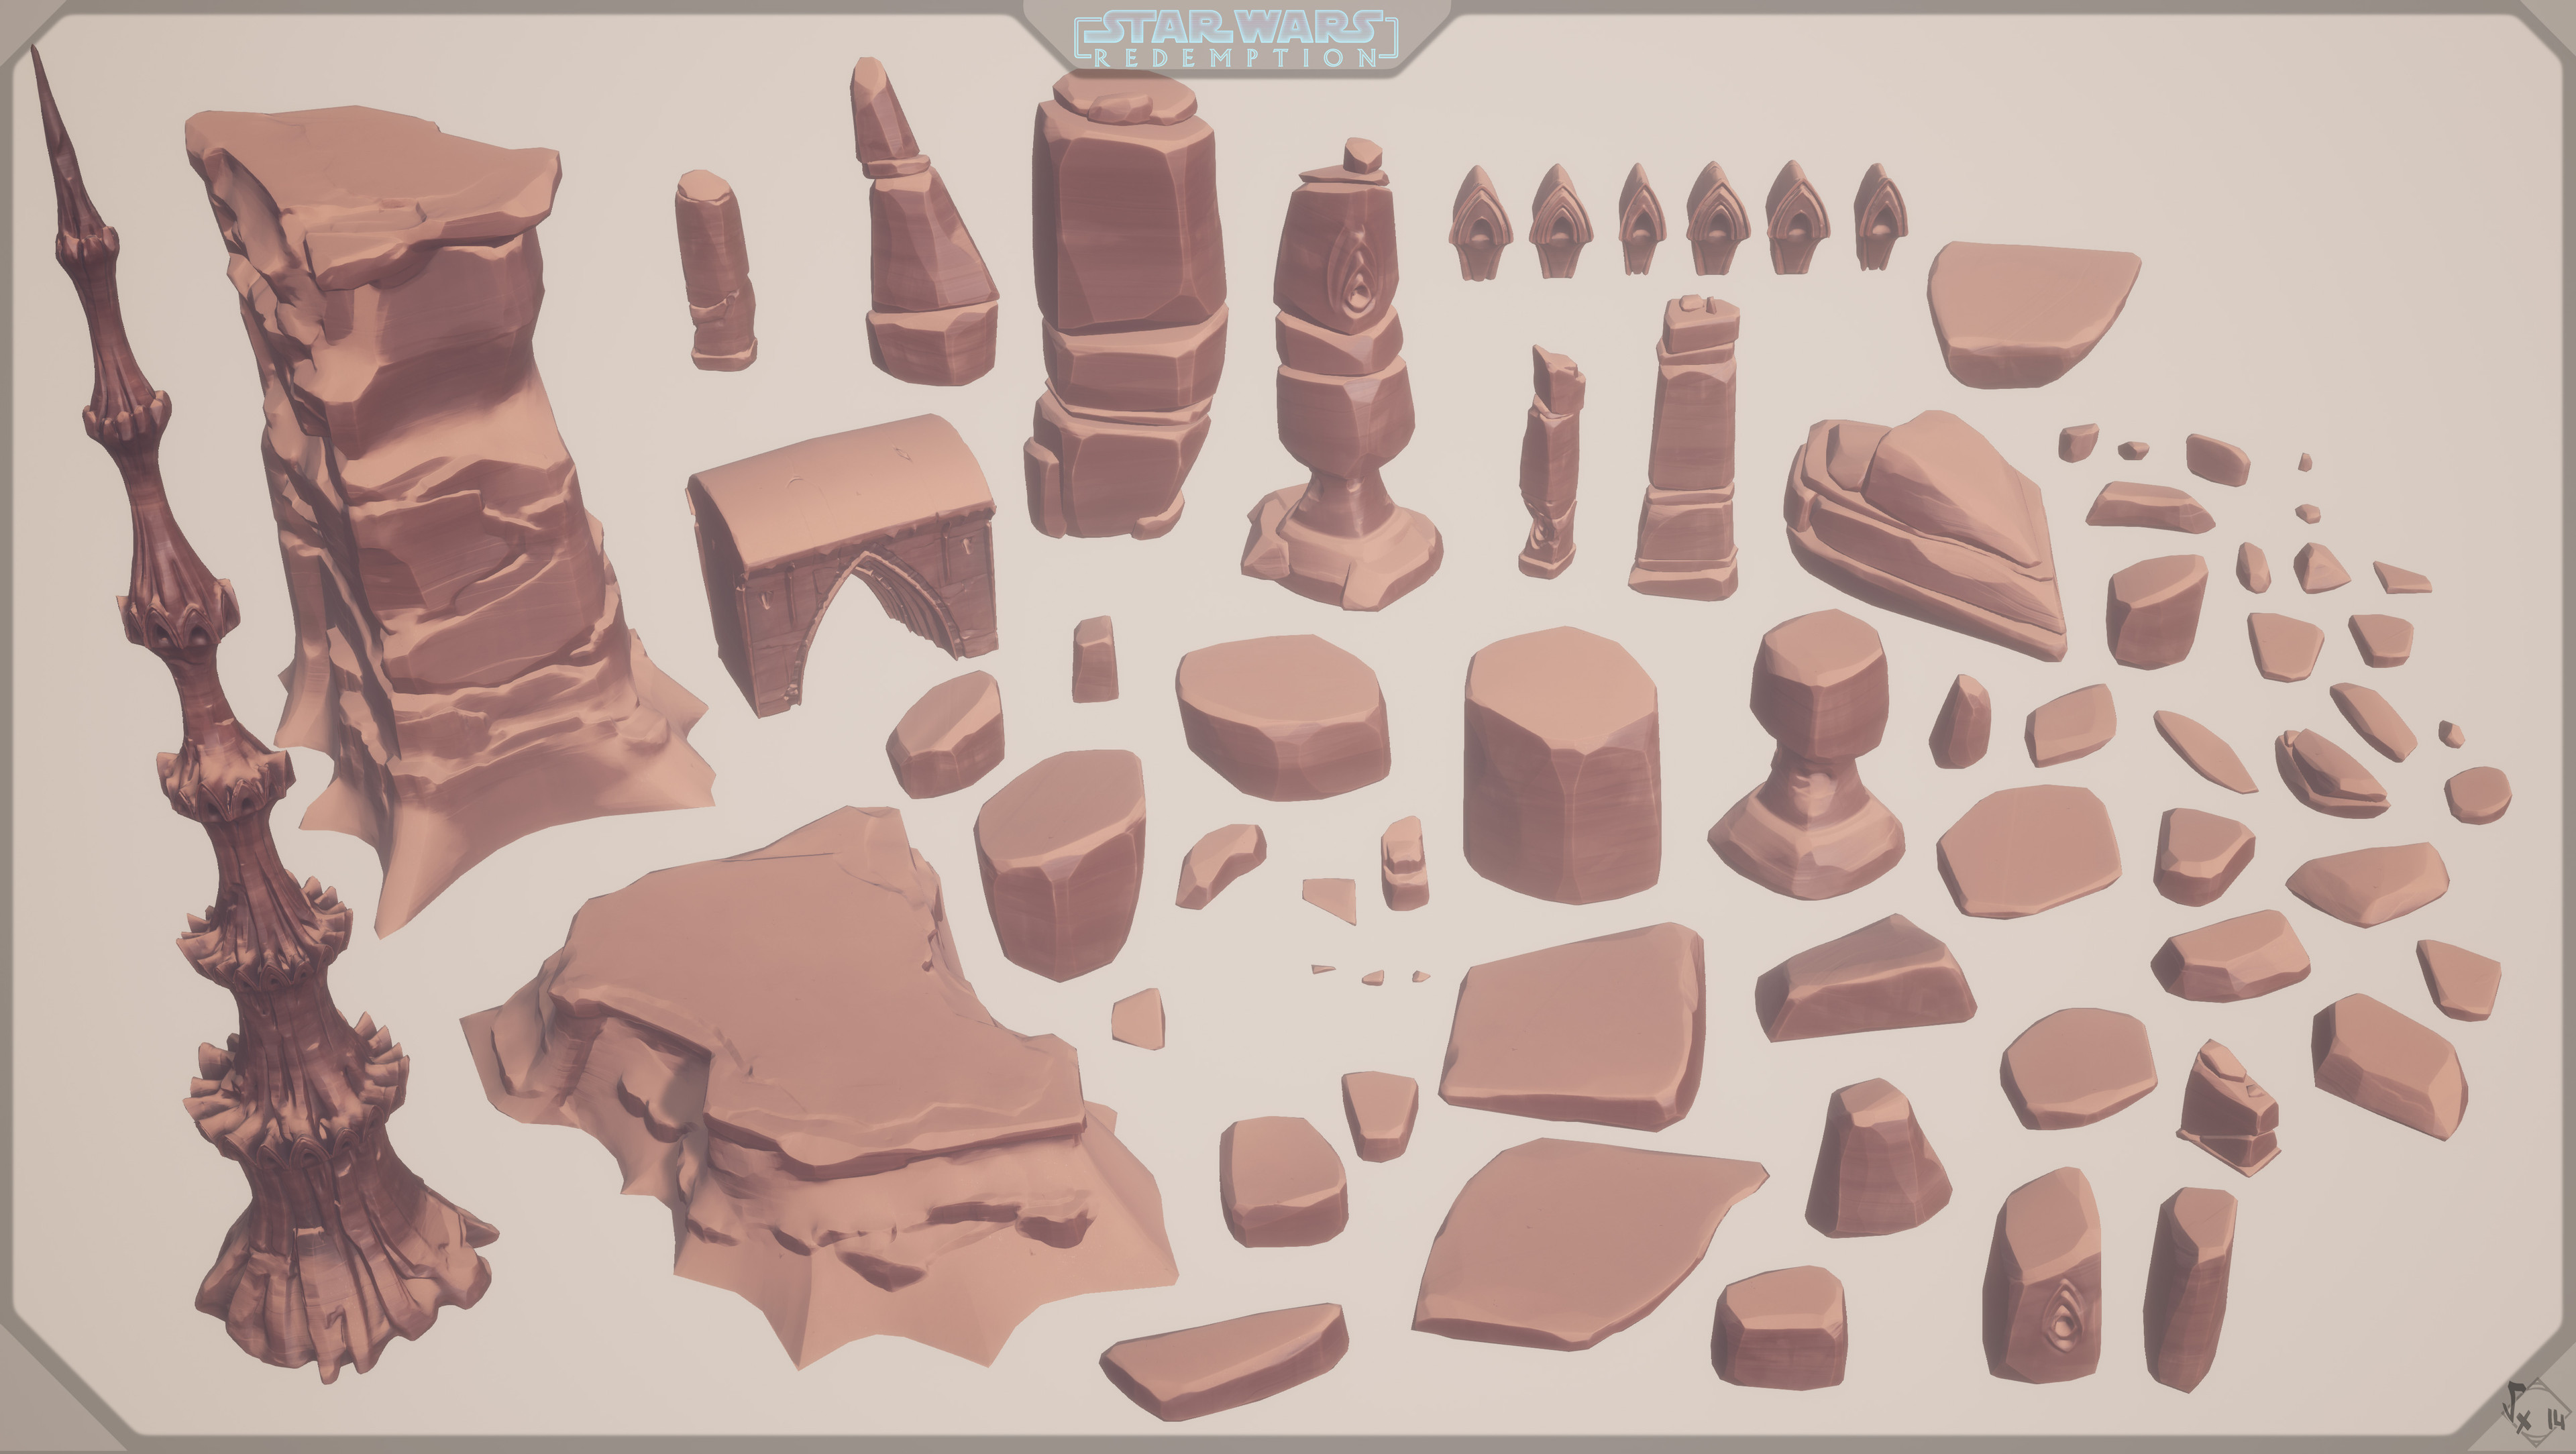 All assets used for Geonosis environment